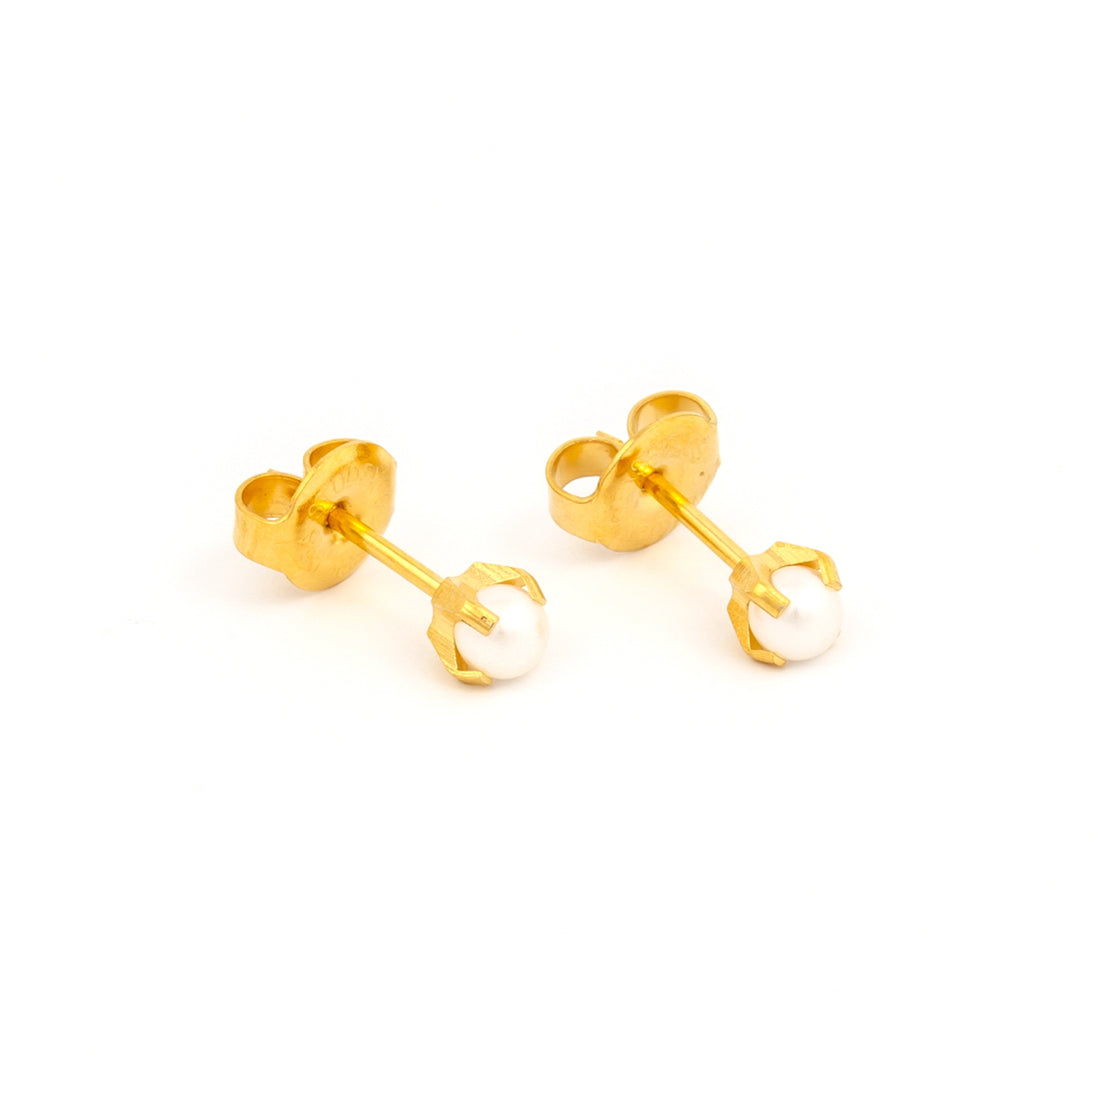 4MM White Pearl 24K Pure Gold Plated Piercing Ear Stud